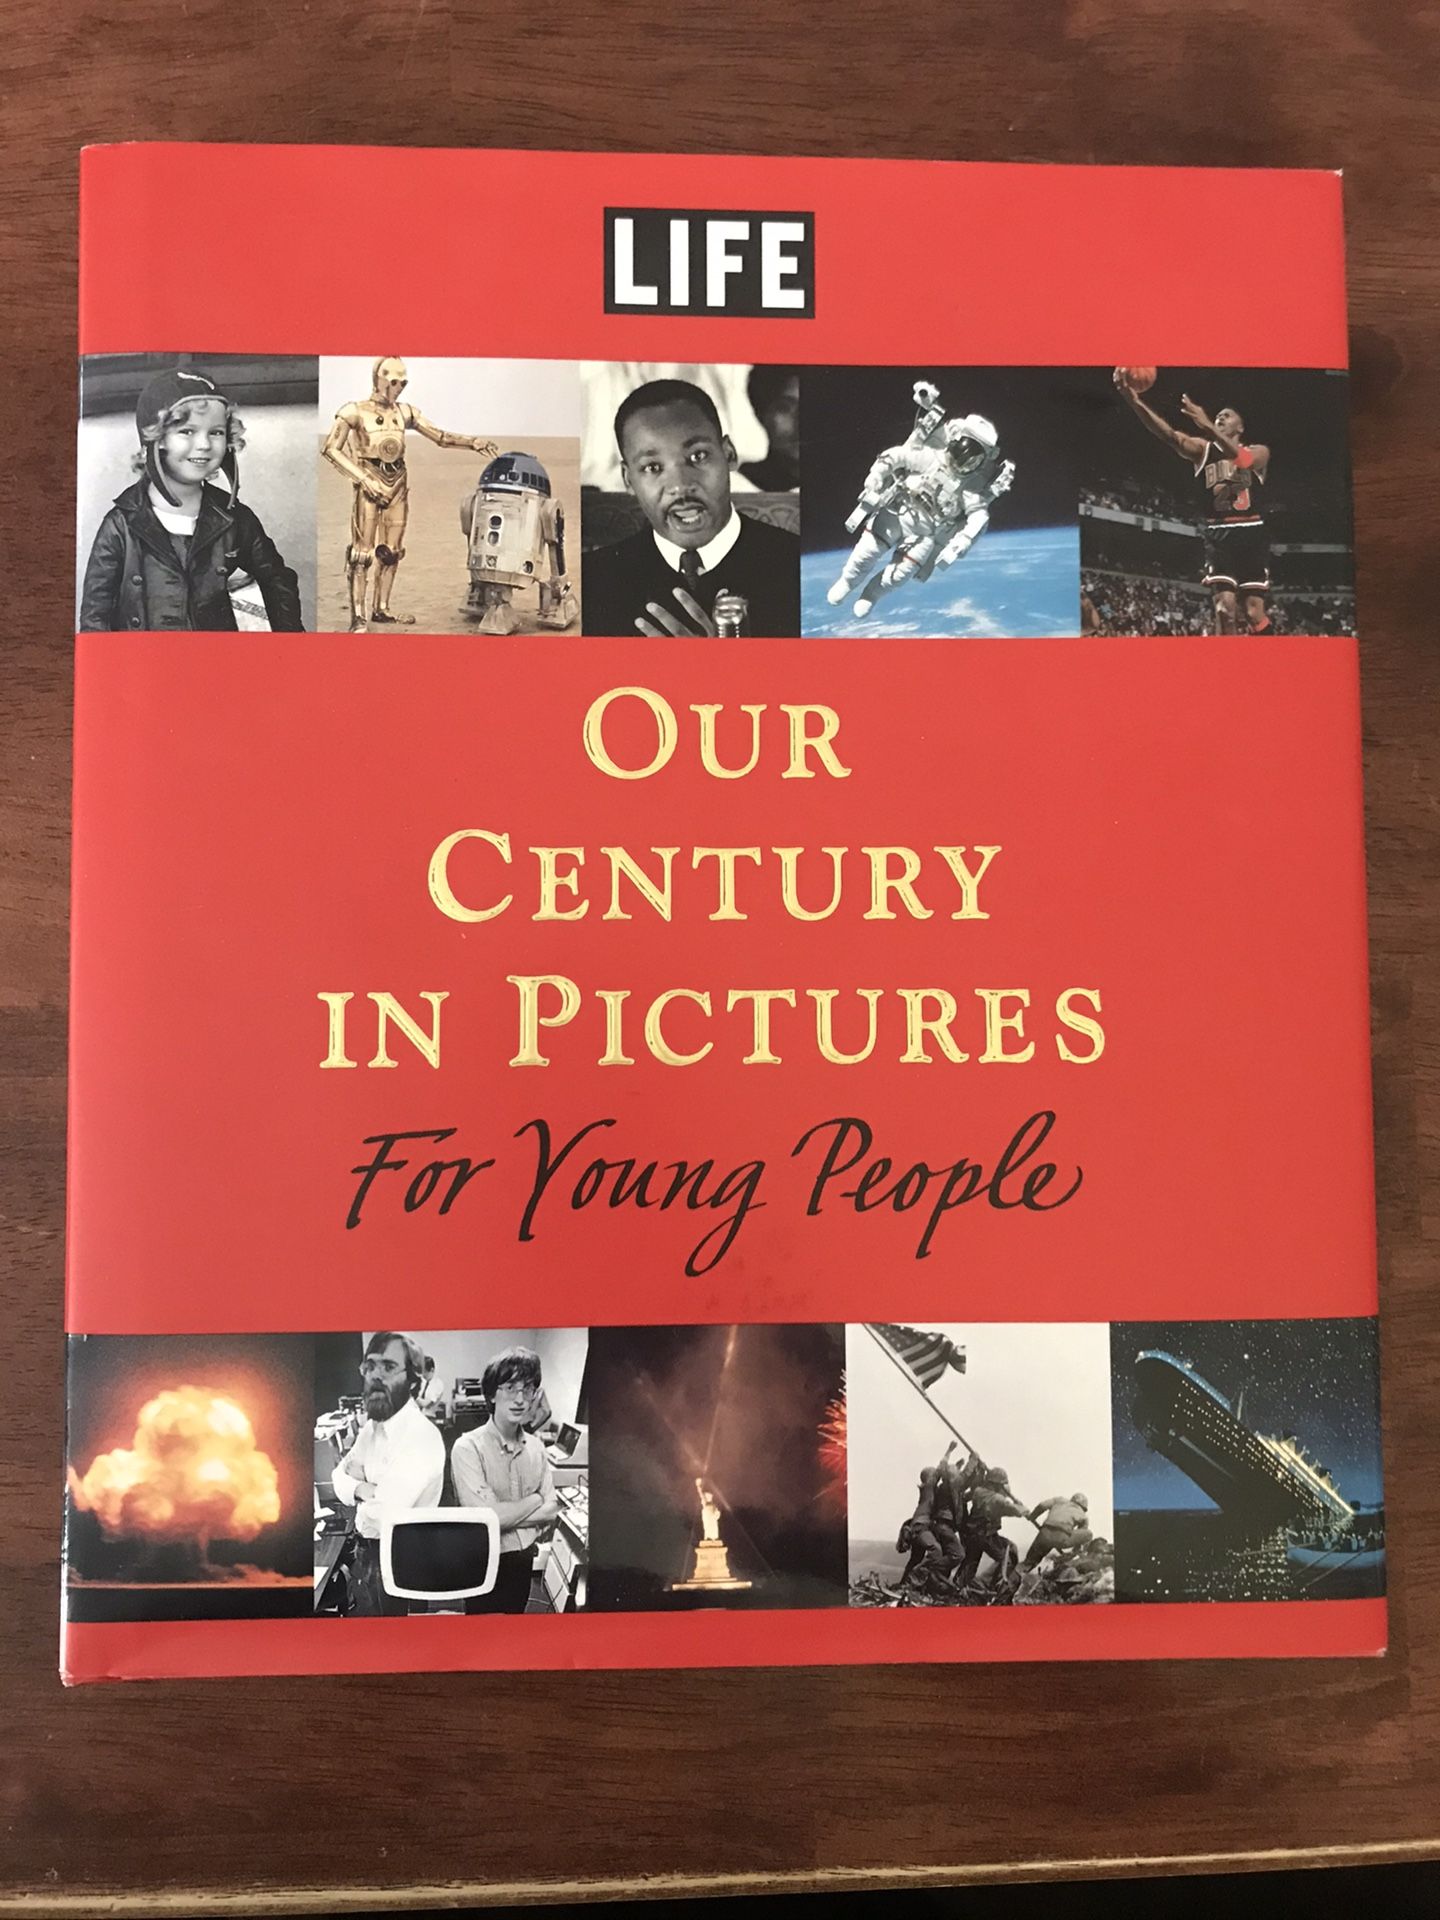 LIFE Our Century in Pictures for Young People